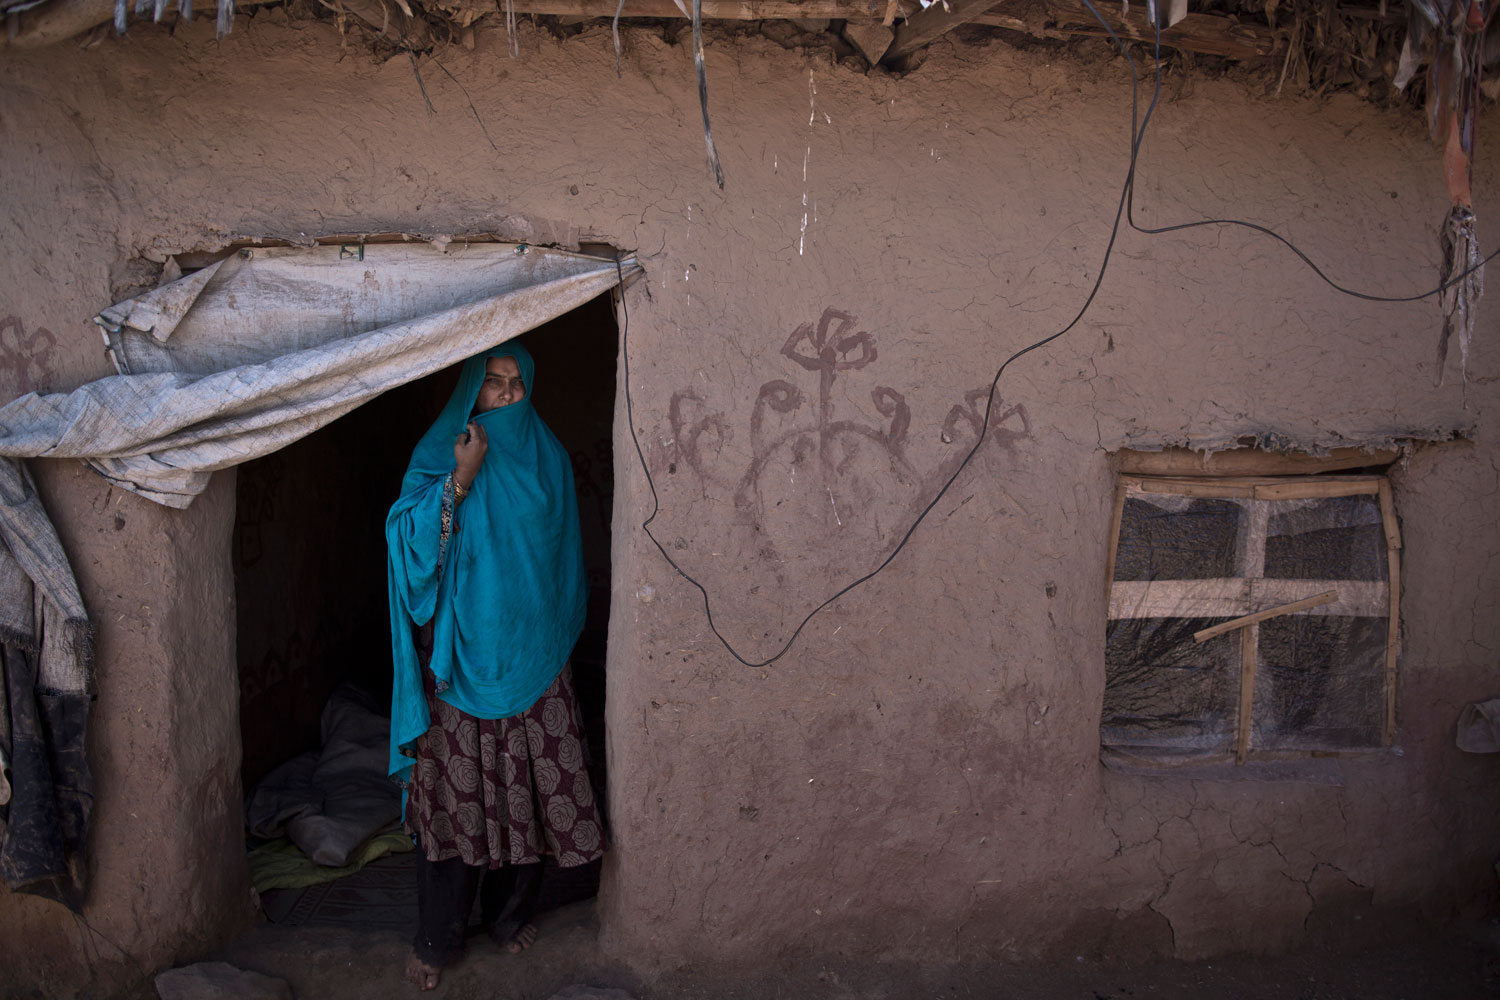 Afghan refugee Belquis Elias, 42, a mother of 4 children who are now adults, at the doorway of her mud house on the outskirts of Islamabad on March 30, 2014. Elias and her husband fled their hometown of Khairabad 19 years ago and took refuge in Pakistan.
                              
                               My two sons are living in Afghanistan with their own families, but they are still my children and I am always worried about them.